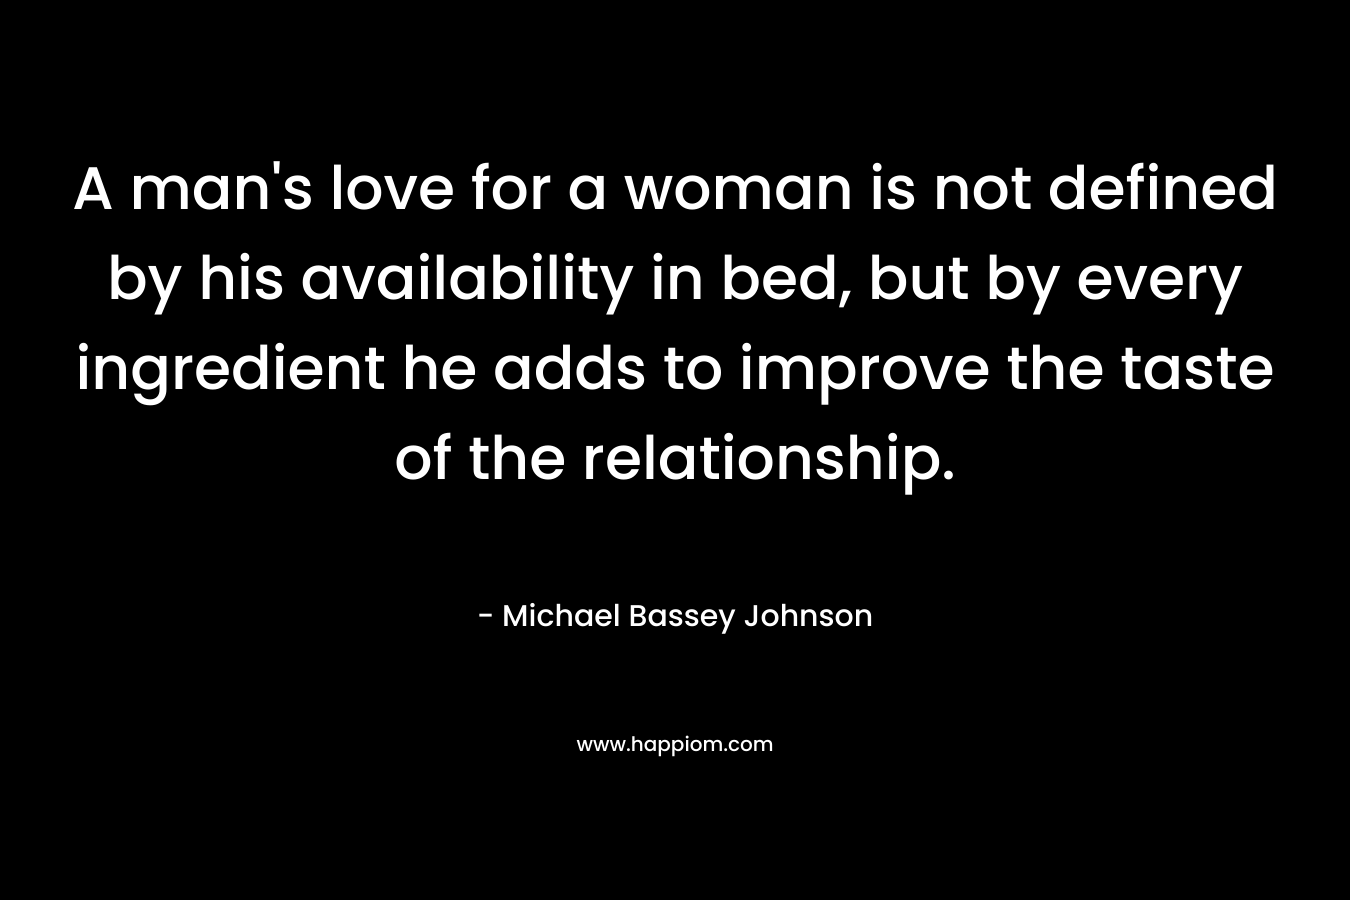 A man’s love for a woman is not defined by his availability in bed, but by every ingredient he adds to improve the taste of the relationship. – Michael Bassey Johnson